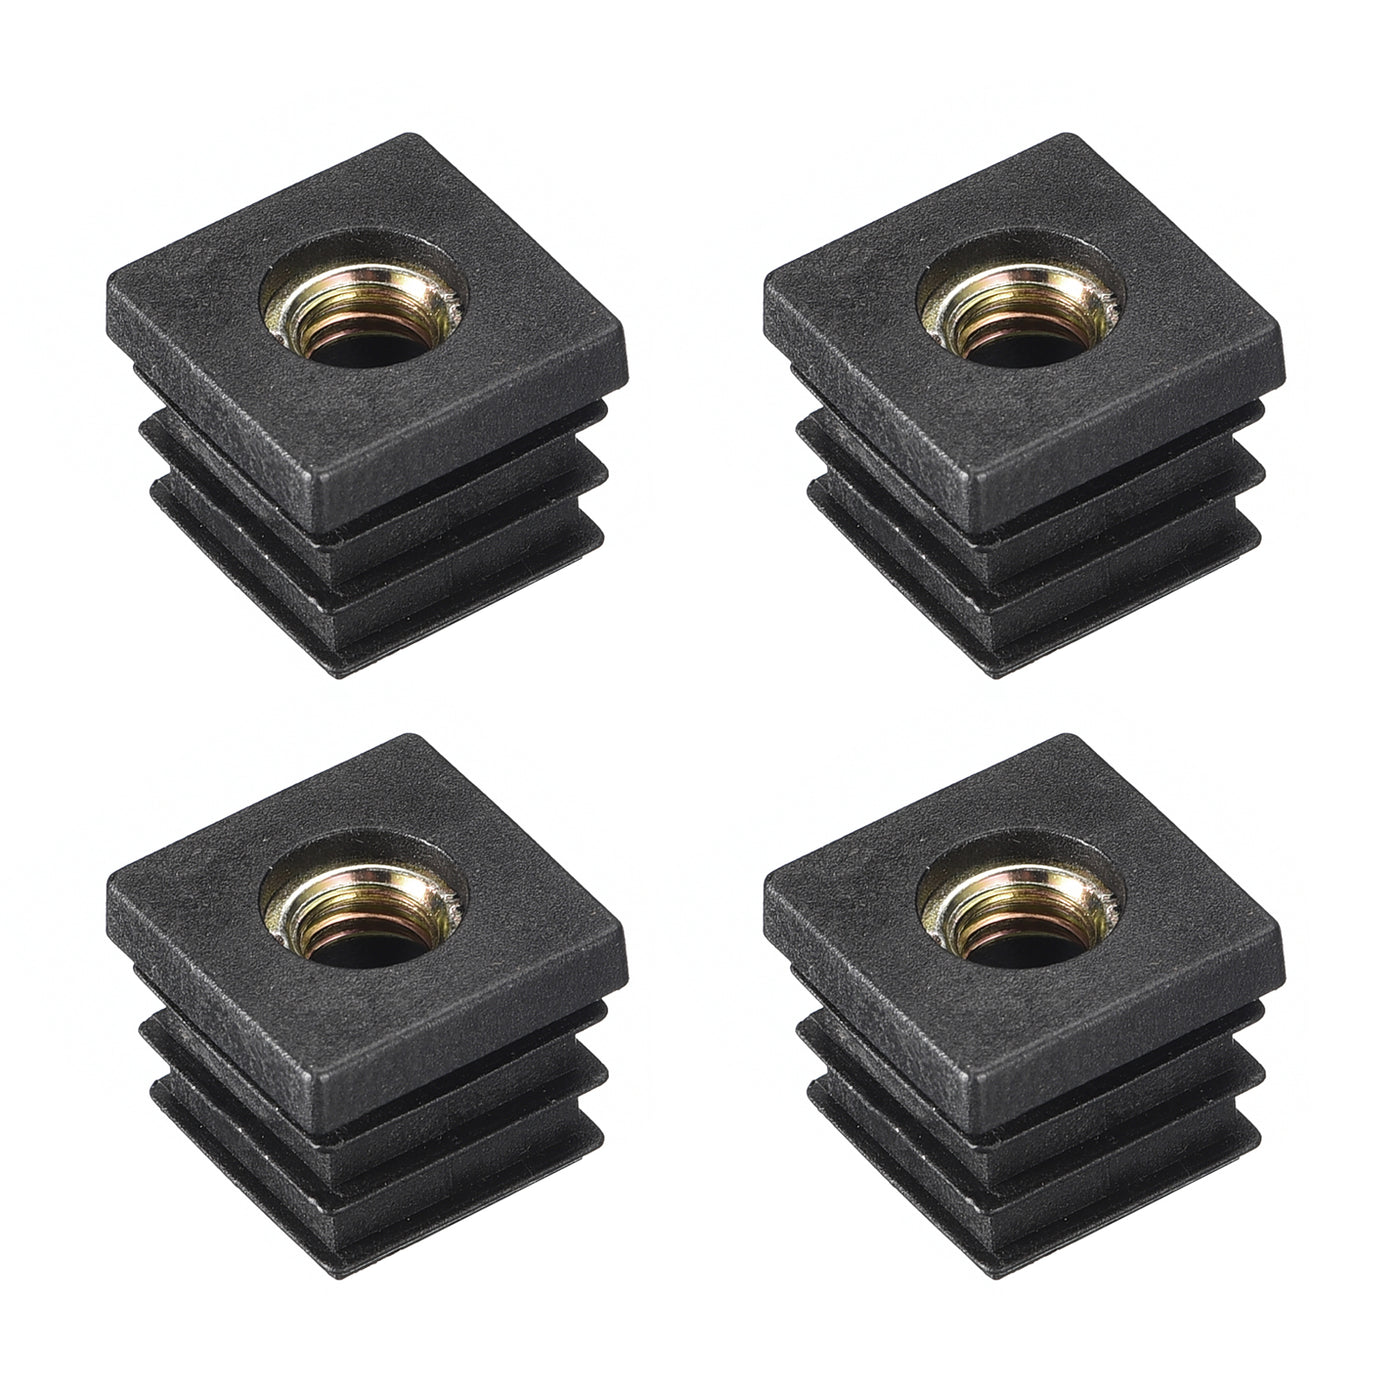 uxcell Uxcell 4Pcs 0.87"x0.87" Caster Insert with Thread, Square M8 Thread for Furniture